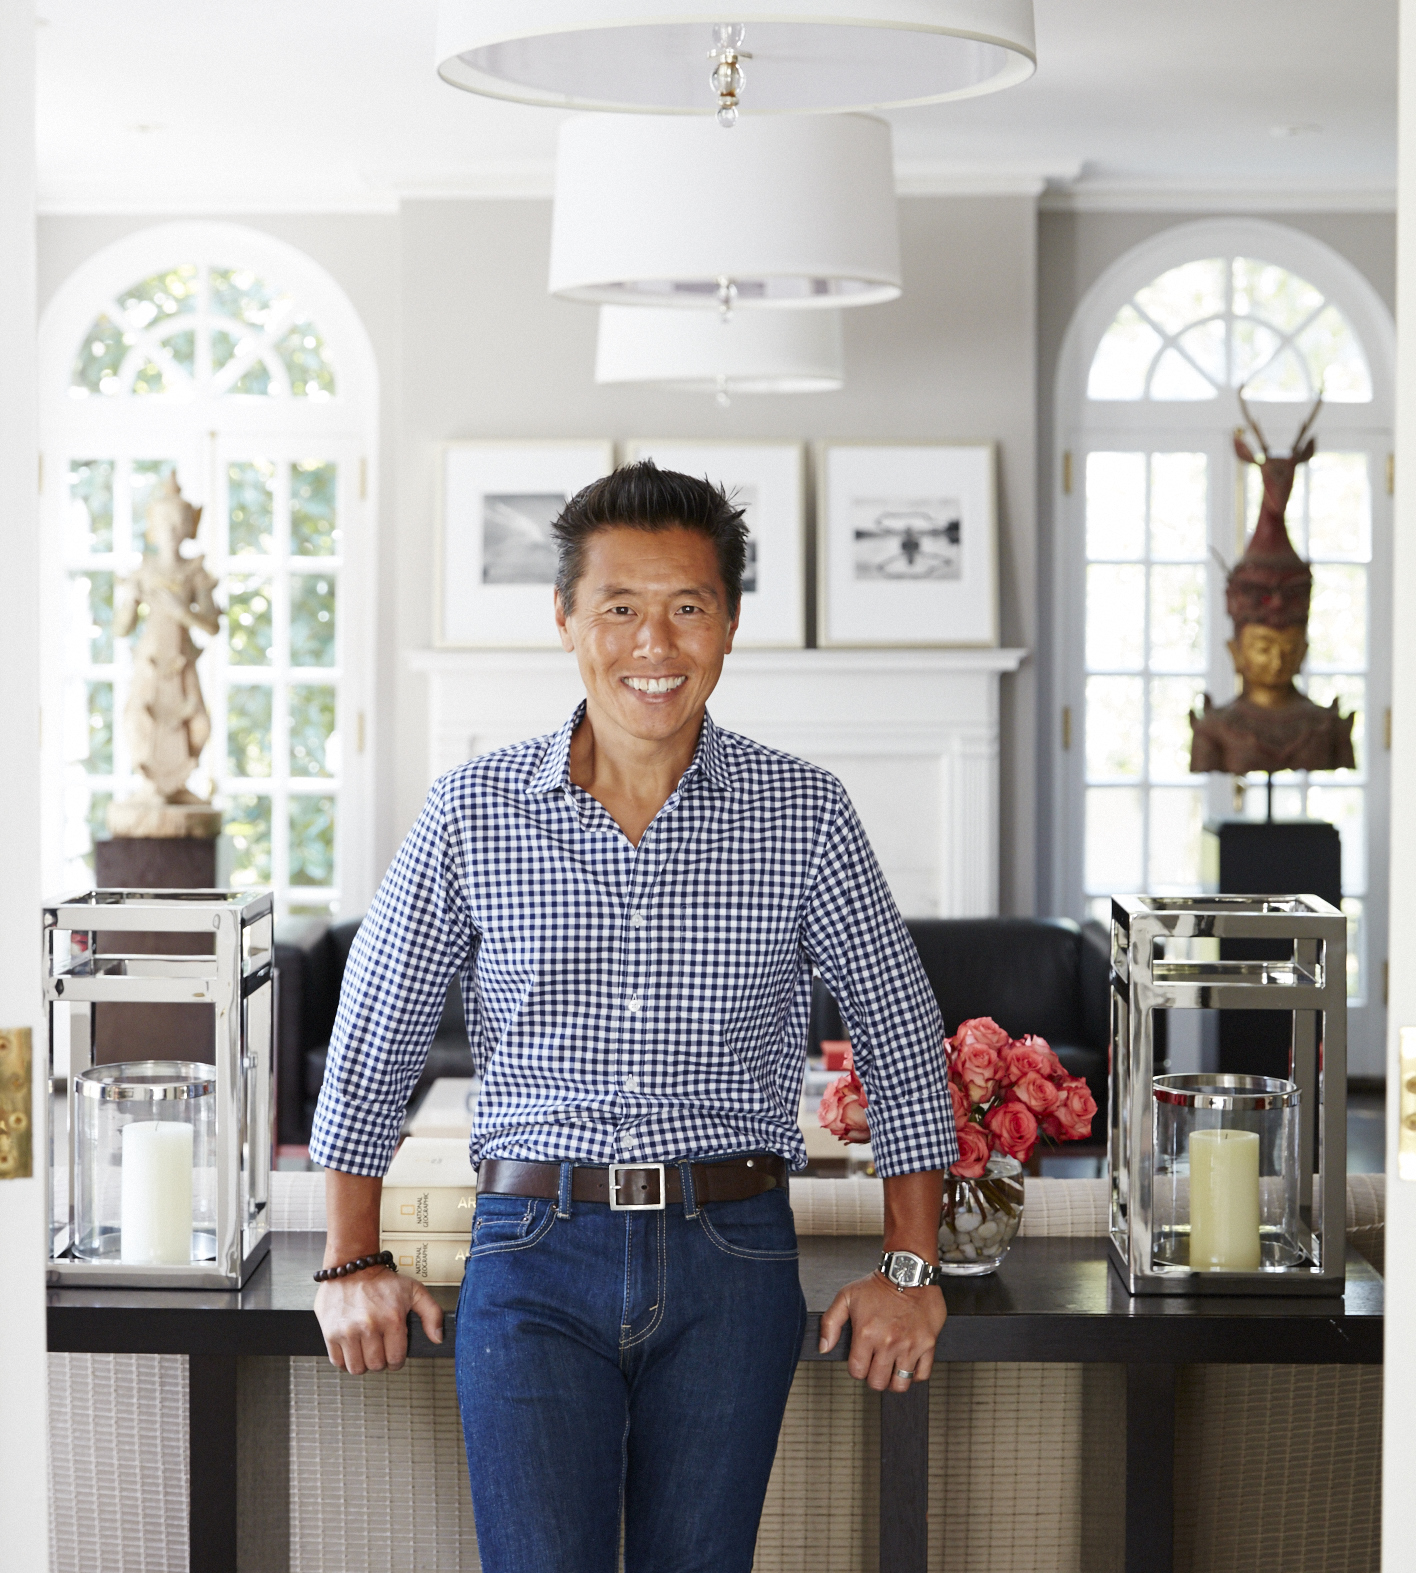 Vern Yip from TLC’s home improvement series “Trading Spaces” appearing at Michigan International Women’s Show